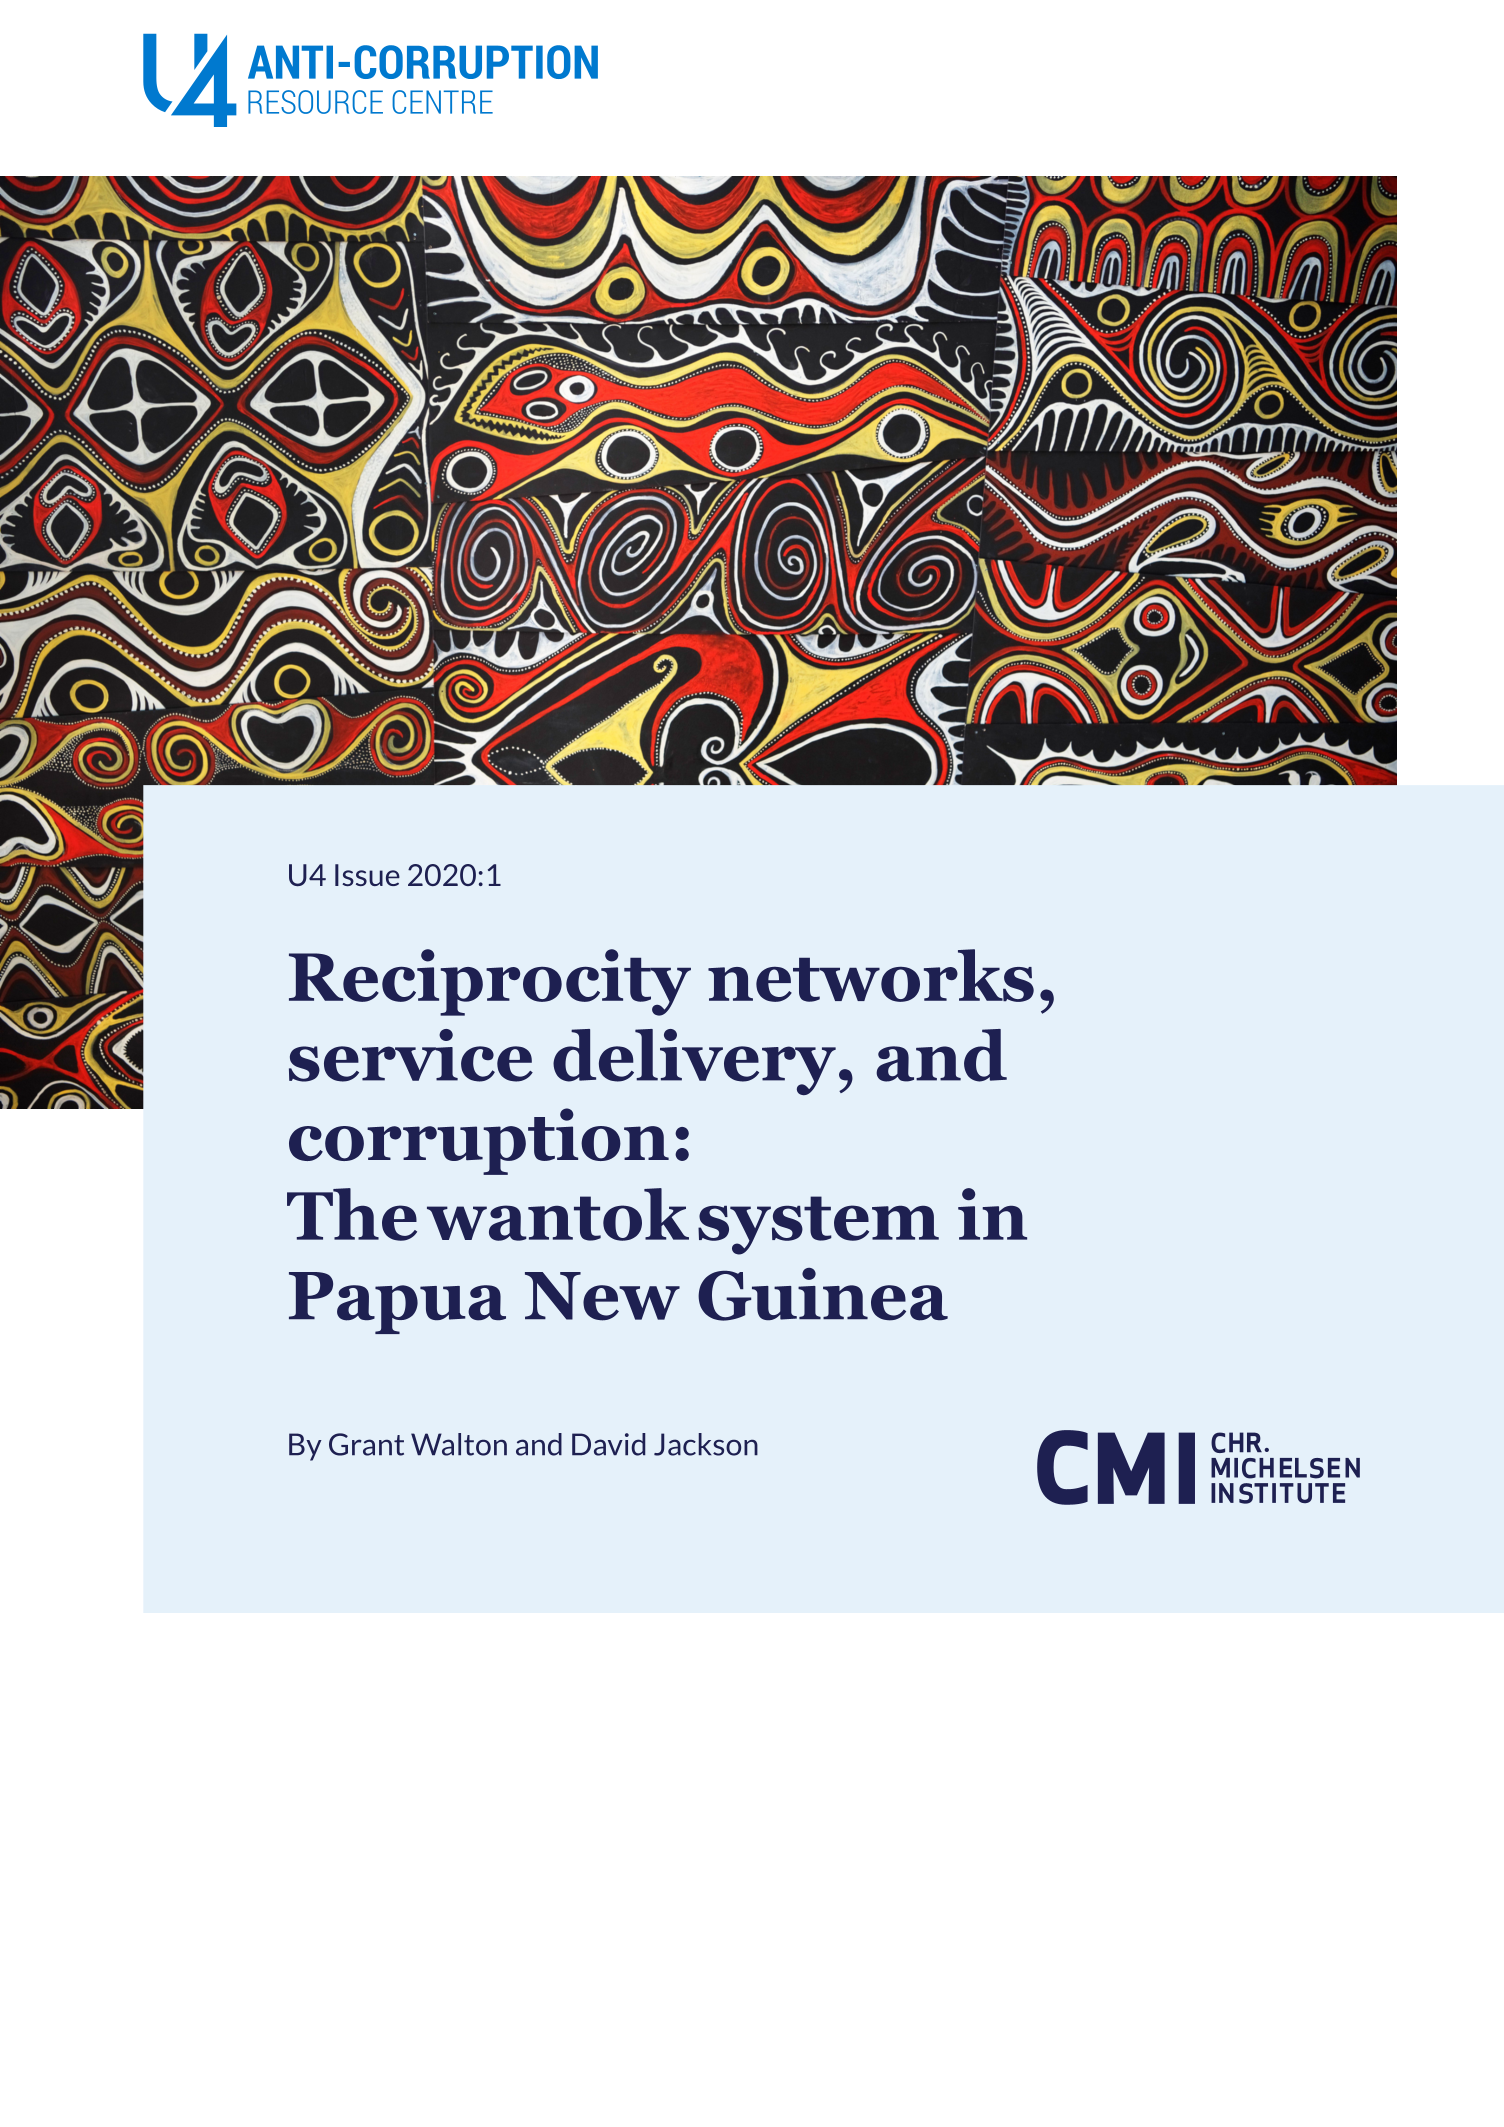 Reciprocity networks, service delivery, and corruption: The wantok system in Papua New Guinea